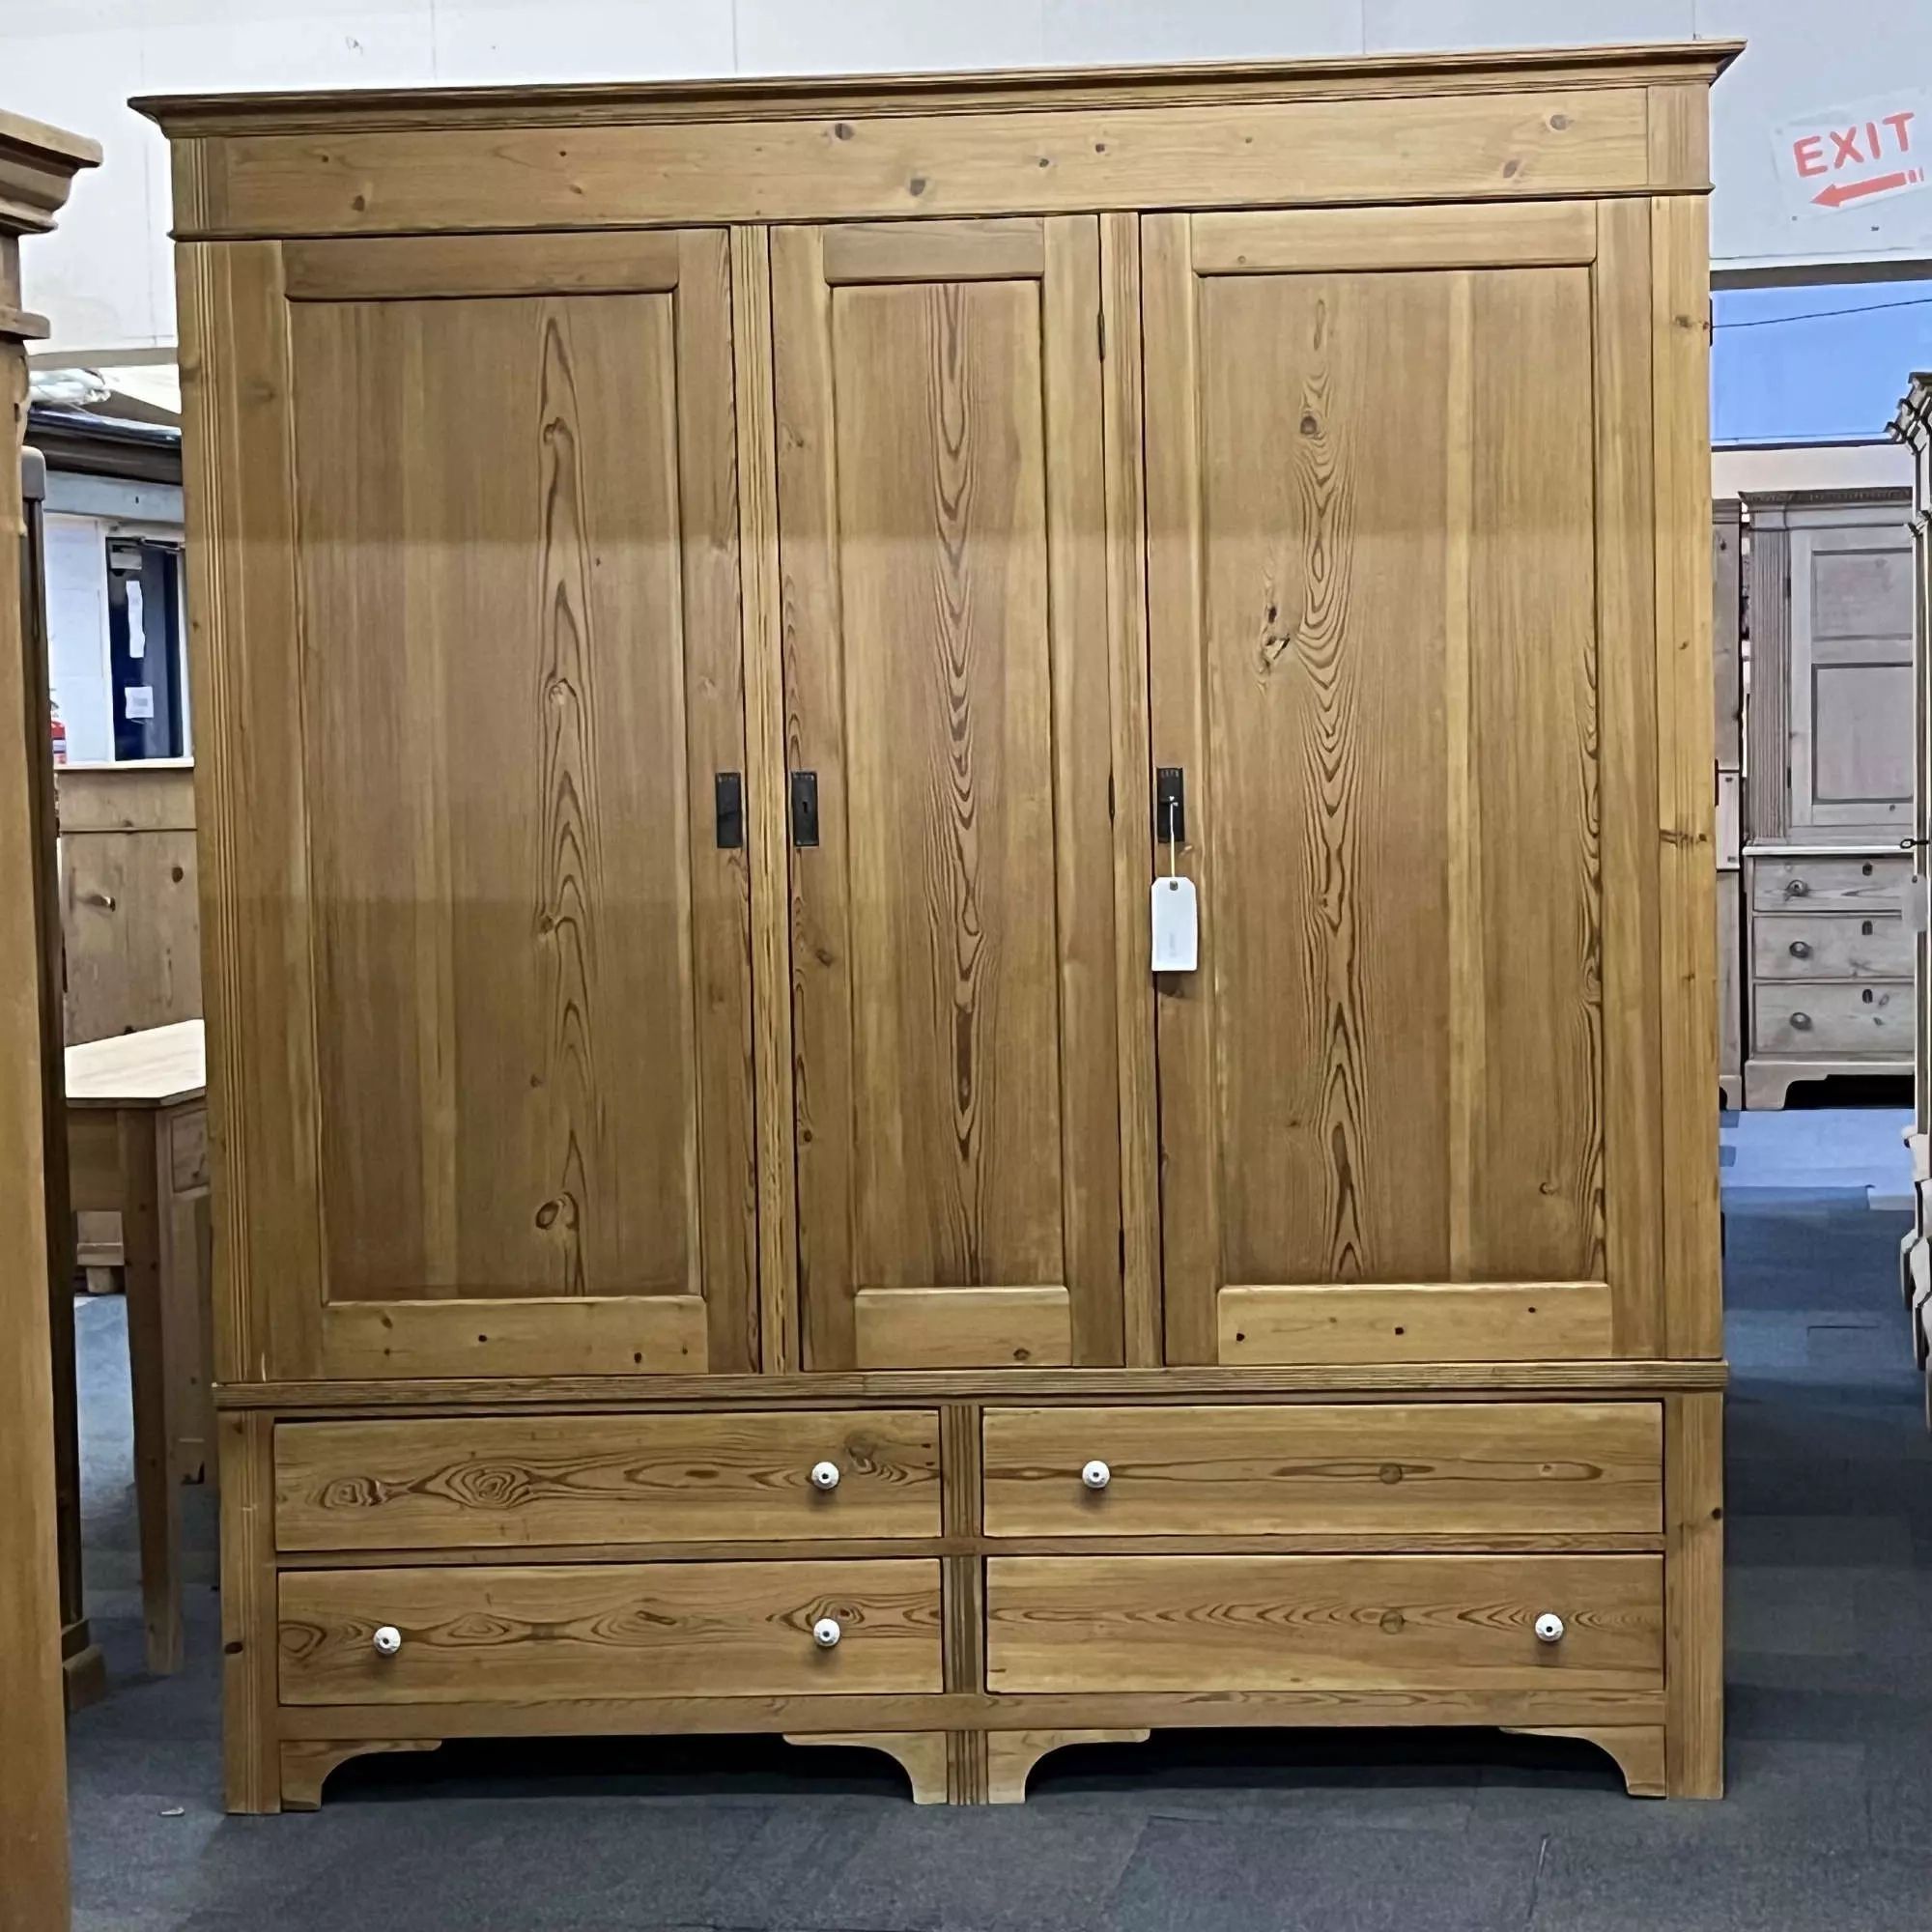 Xtremely Large East German Triple Antique Pine Wardrobe With 4 Drawers  (dismantles) In Antique Wardrobes & Armoires Regarding Large Antique Wardrobes (View 5 of 15)